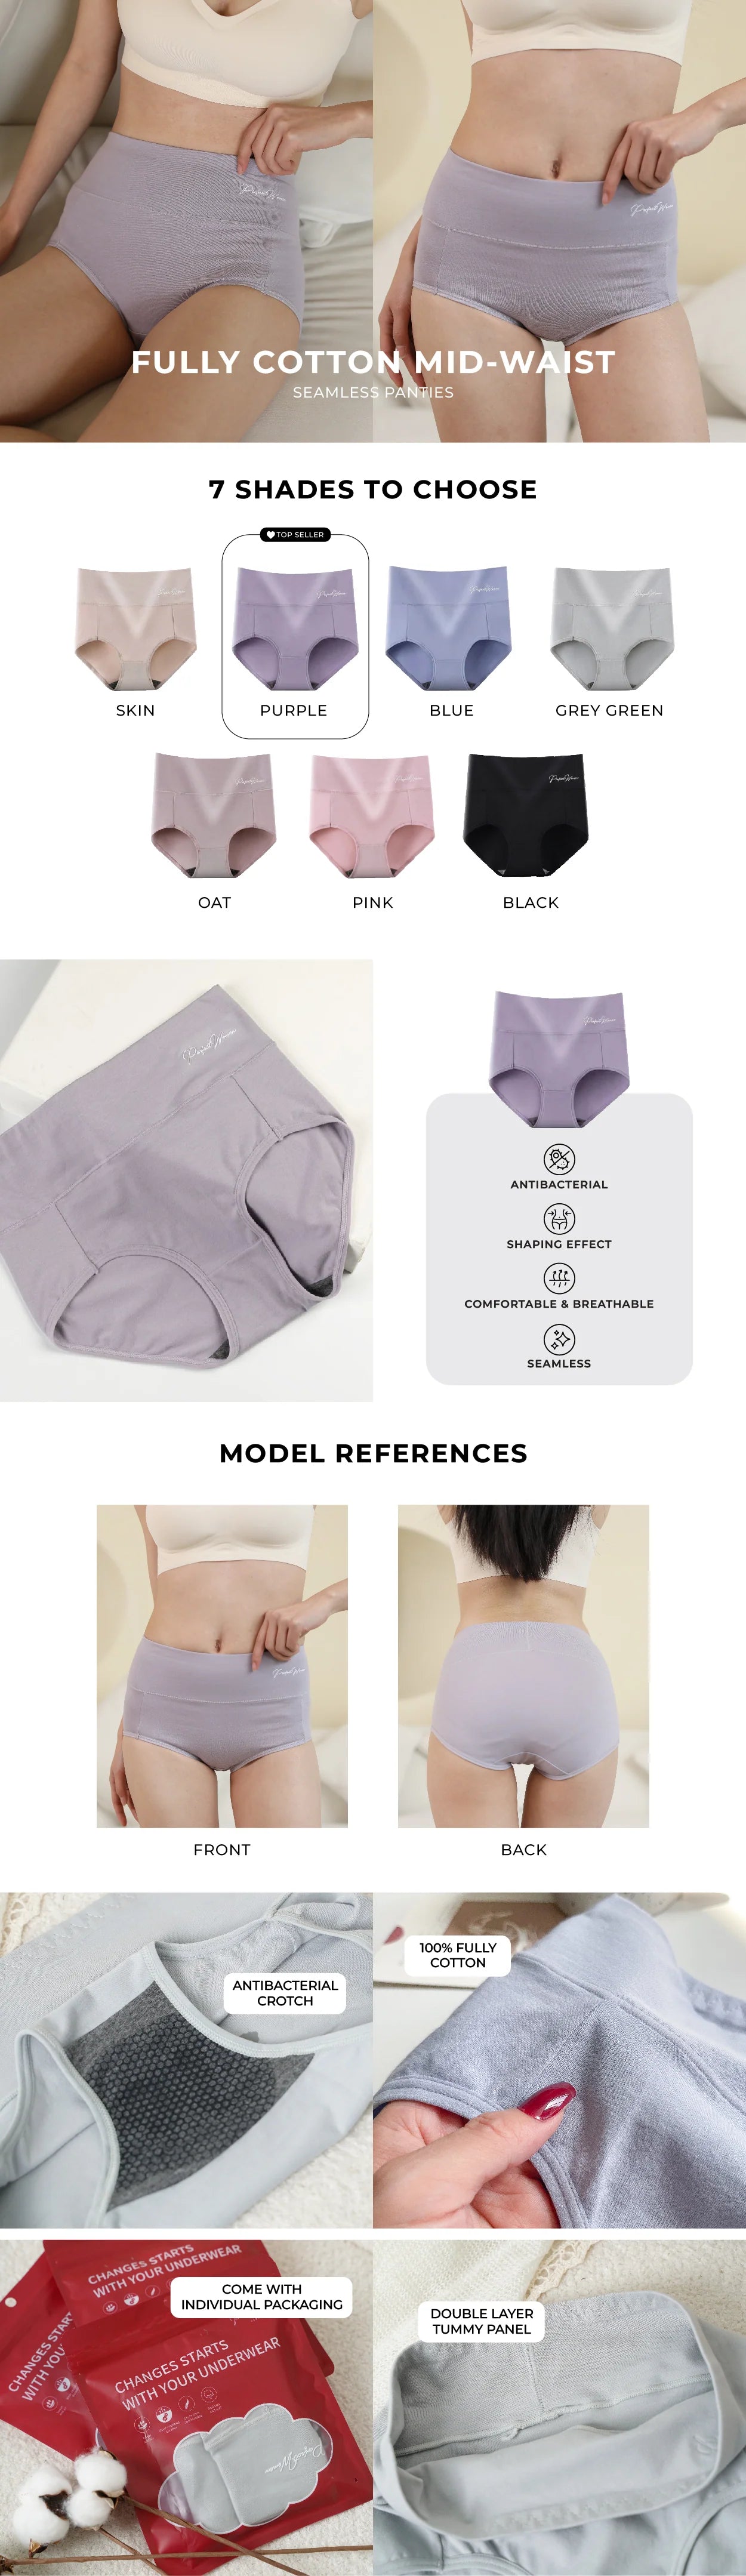 Chantelle's Secret presents a high-waist, fully cotton, seamless panties collection in seven shades. Features include an antibacterial crotch, shaping effect, comfortable and breathable fabric, with individual packaging. Models show the front and back view of underwear for a comprehensive fit guide.